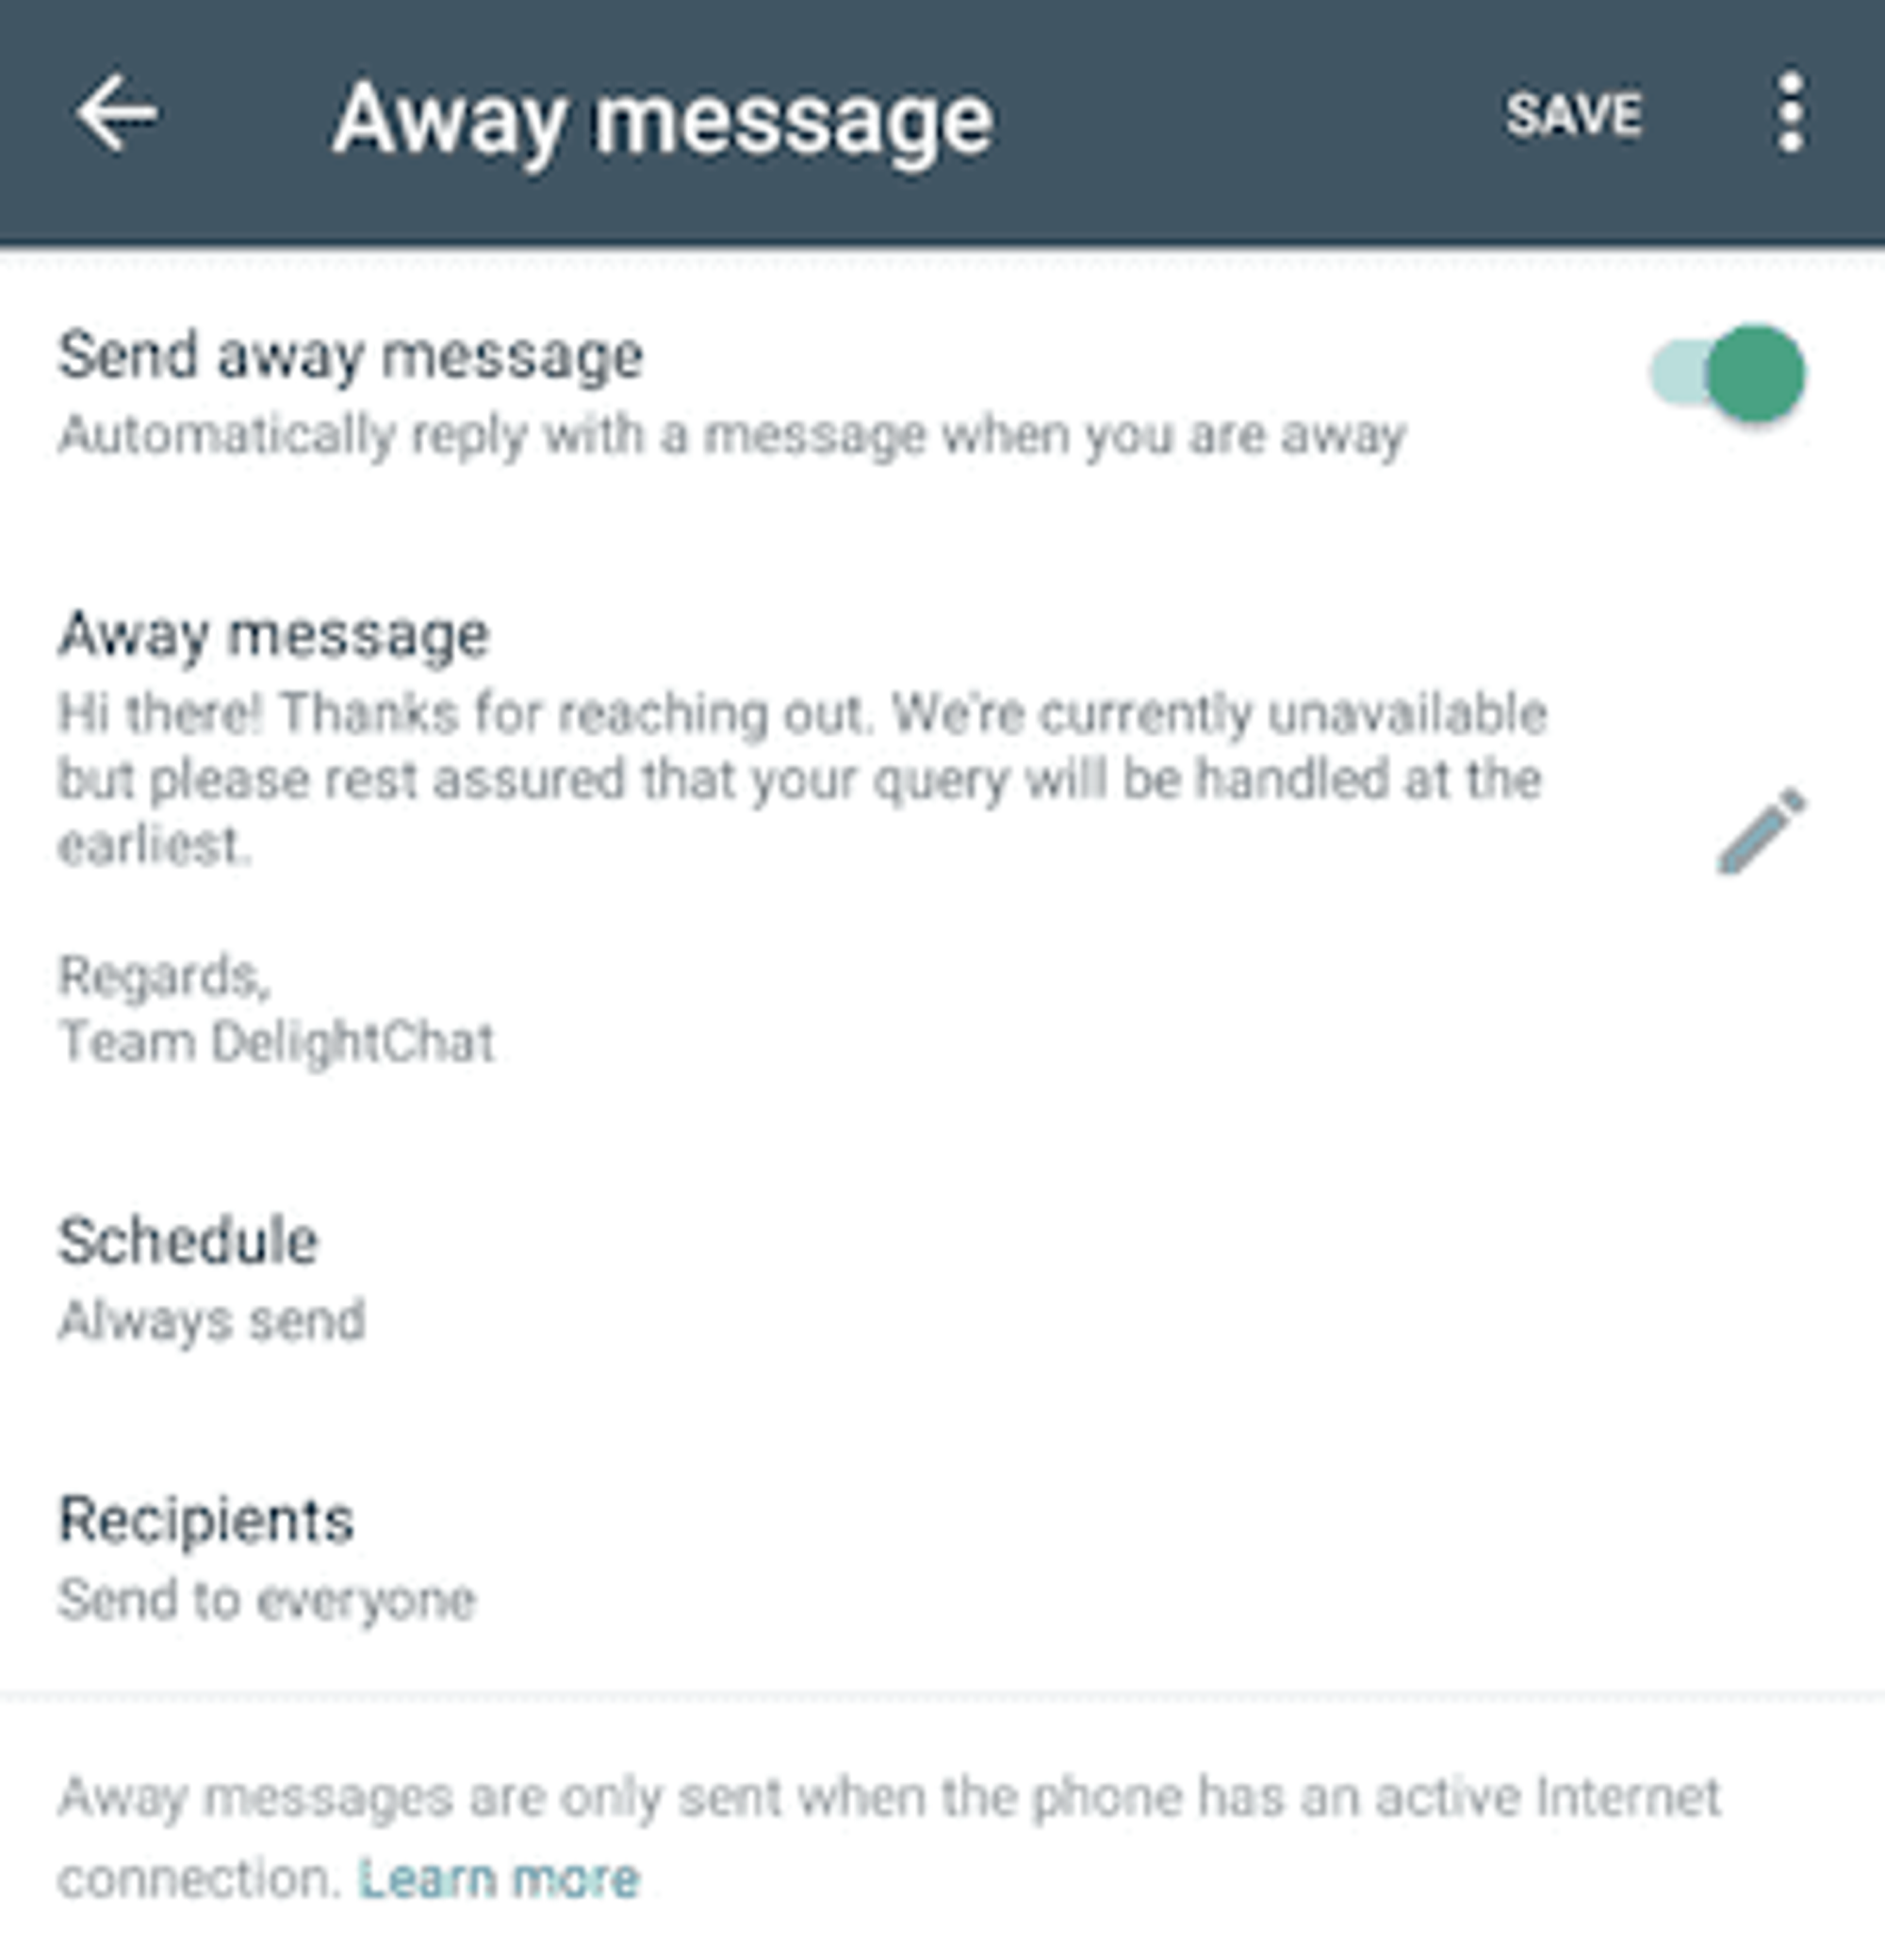 Activate away messages